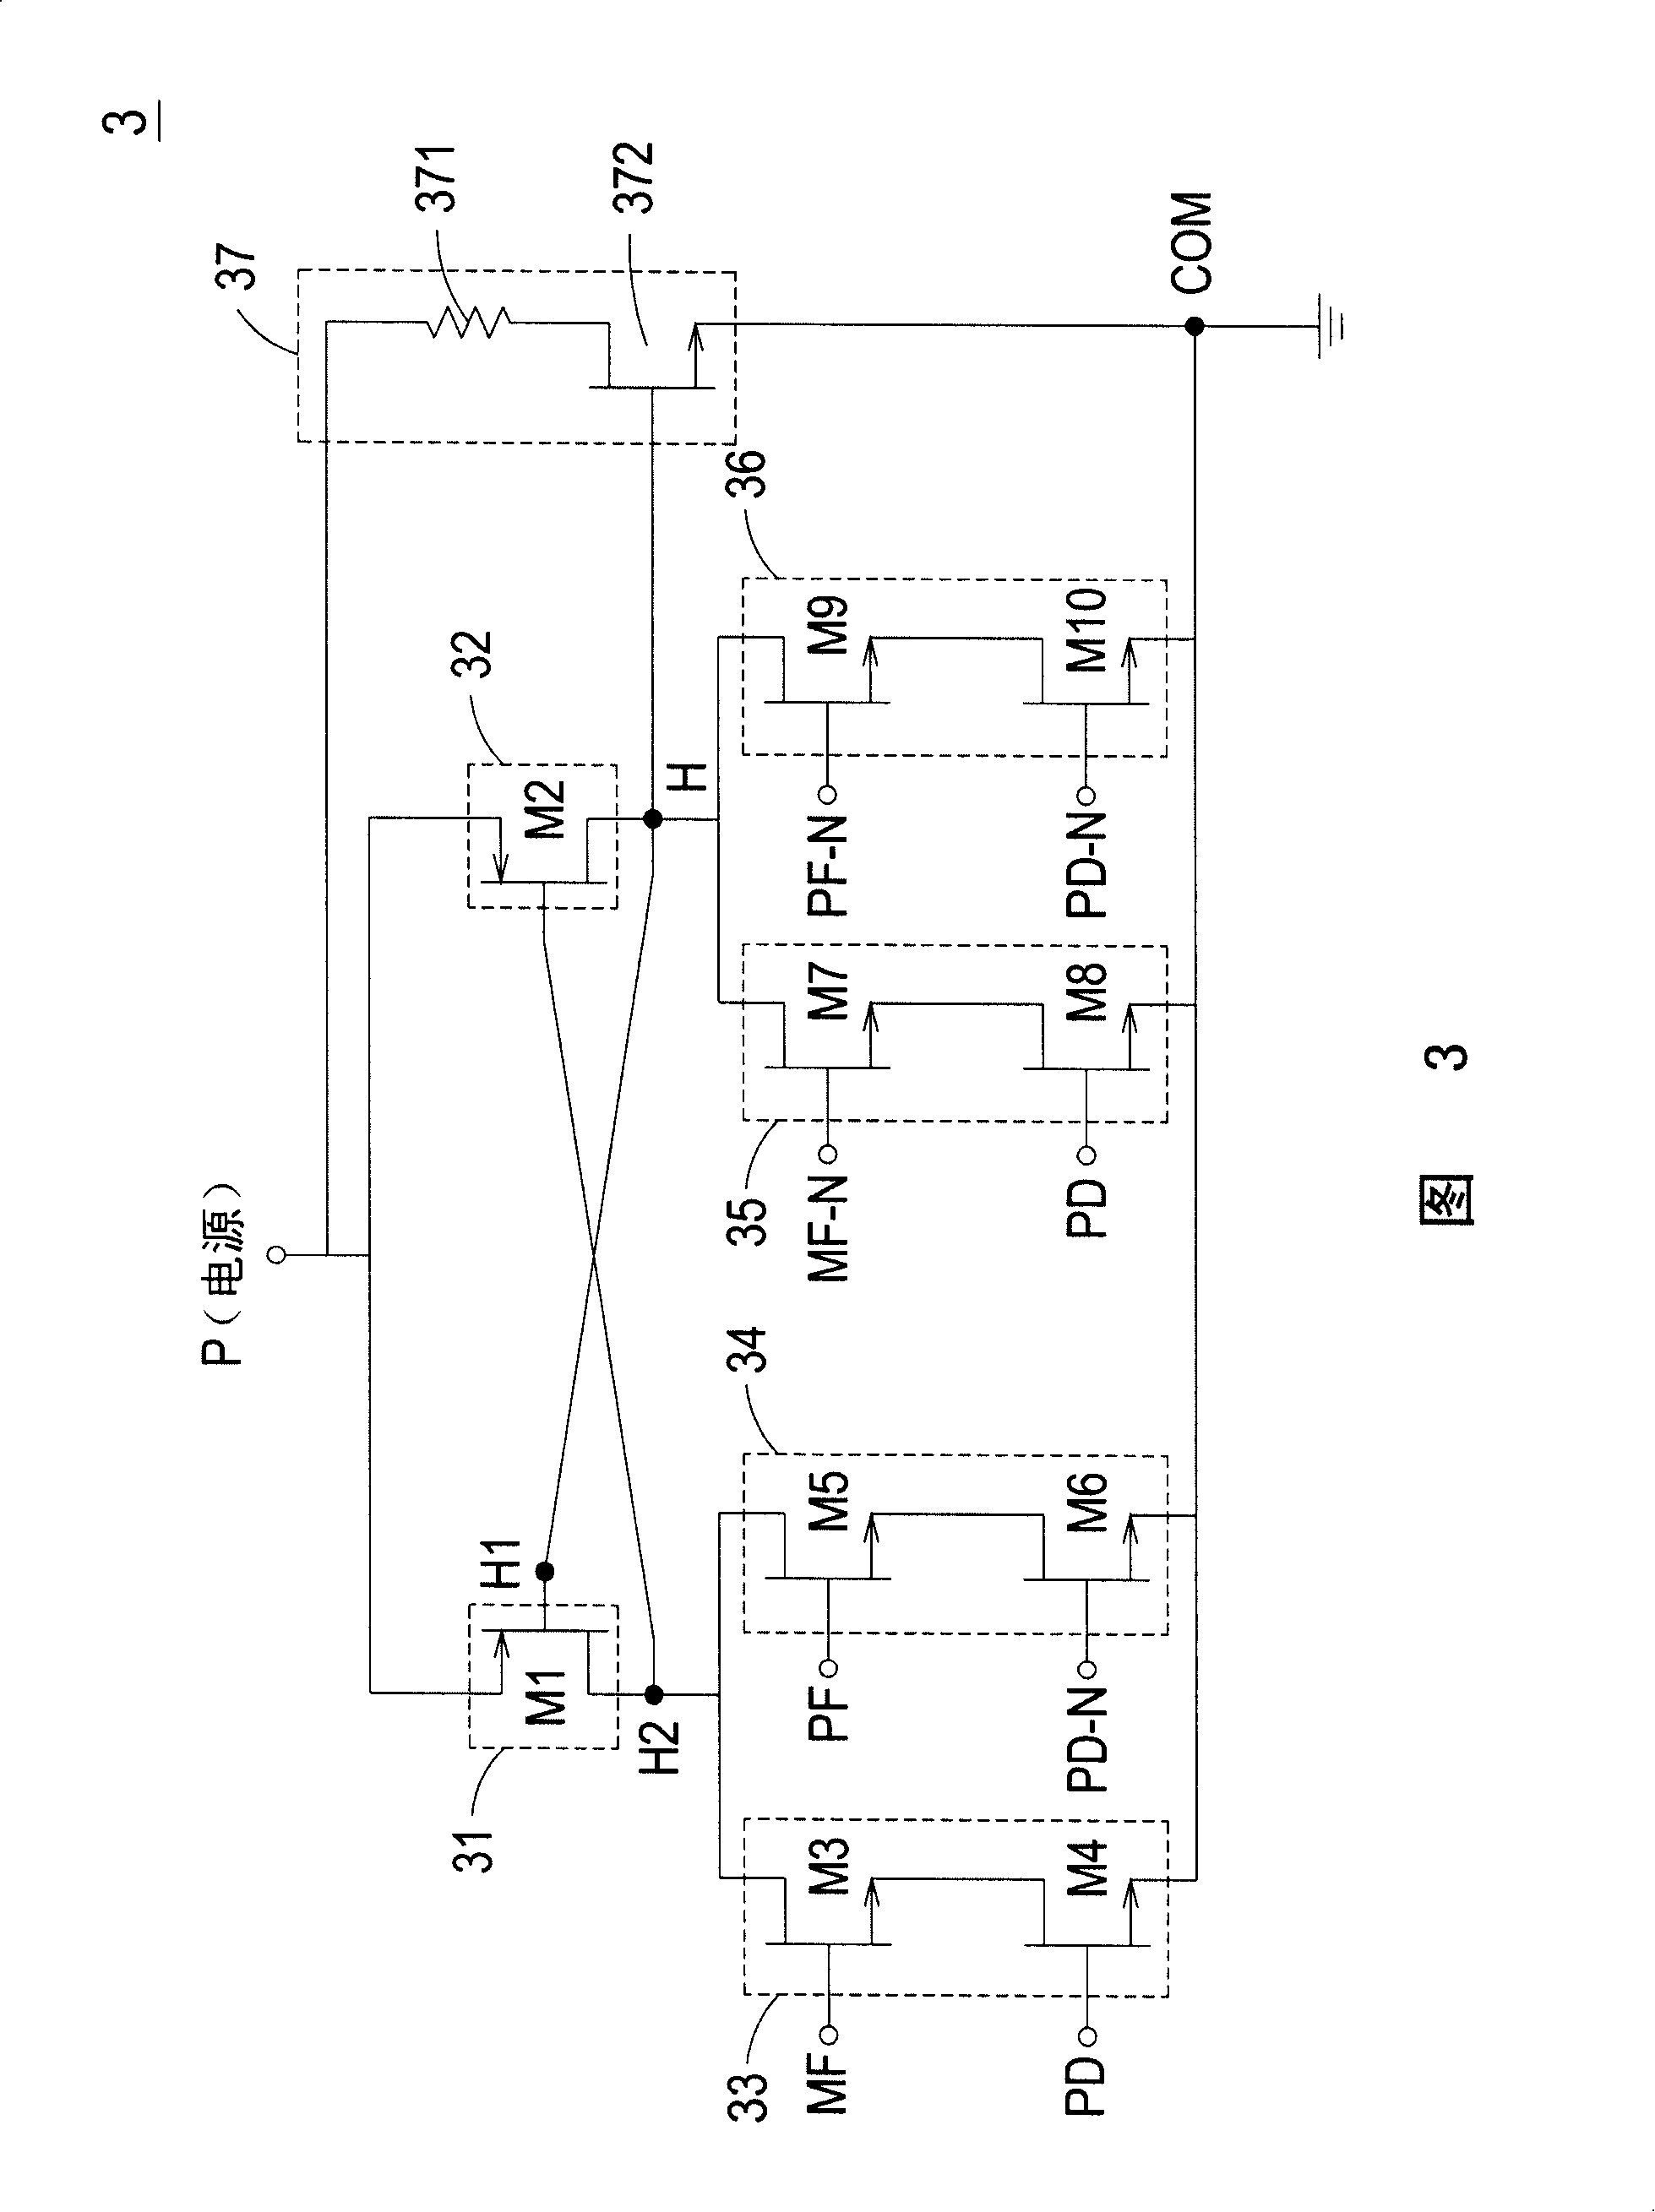 Ink-jet driving circuit with preheat function